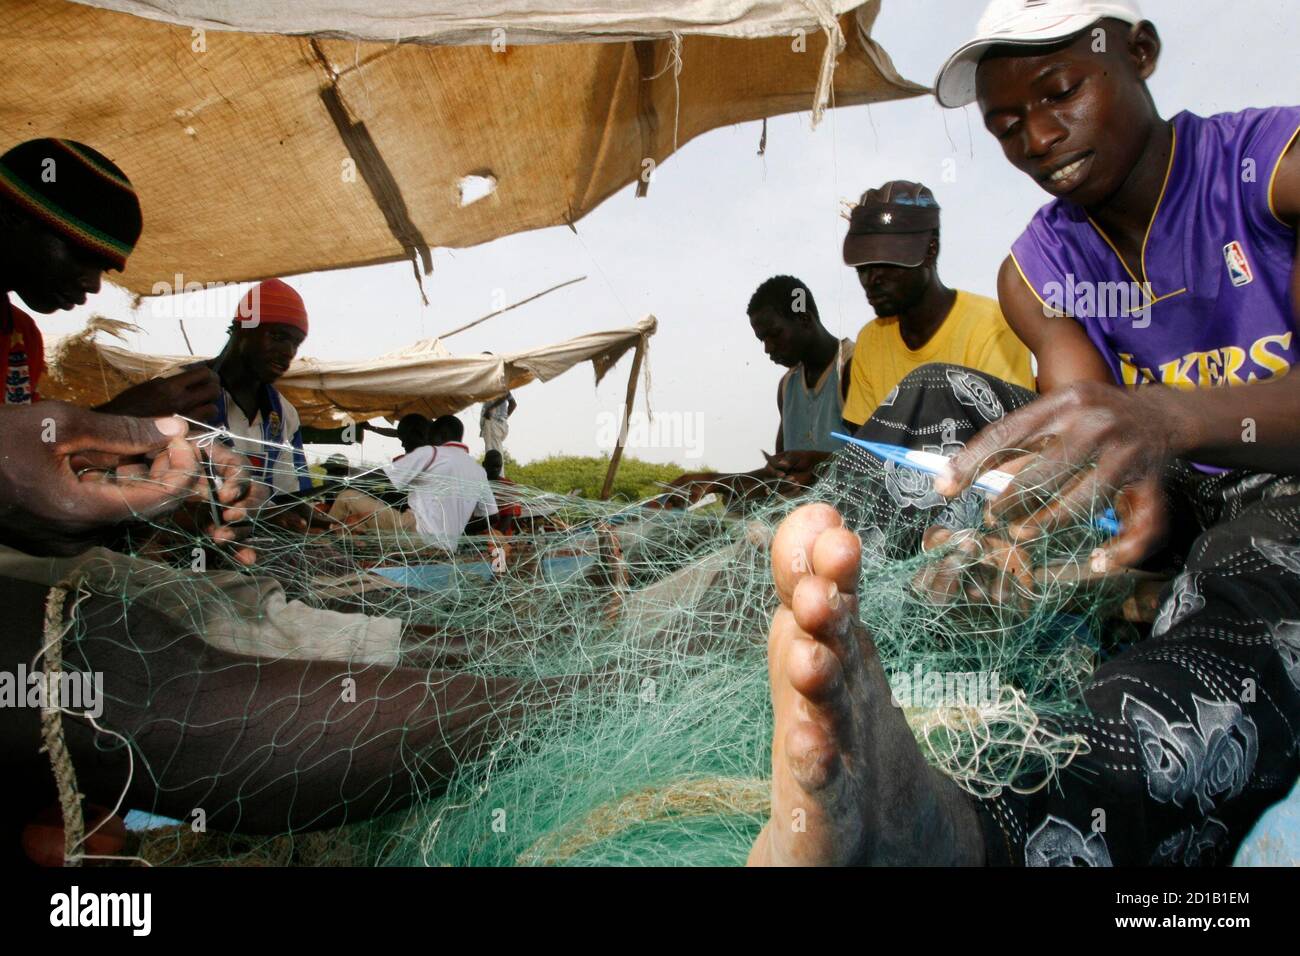 Fishermen repair their nets at a fishing port of Bissau March 10, 2009. Life in Bissau began to return to normal with some shops reopening, but people remained on edge after the killing of Guinea-Bissau's President Joao Bernado 'Nino' Vieira on March 2 in an apparent revenge attack hours after the West African country's army chief General Batista Tagme Na Wai was killed, residents and security sources said. REUTERS/Luc Gnago (GUINEA-BISSAU CONFLICT MILITARY POLITICS) Stock Photo